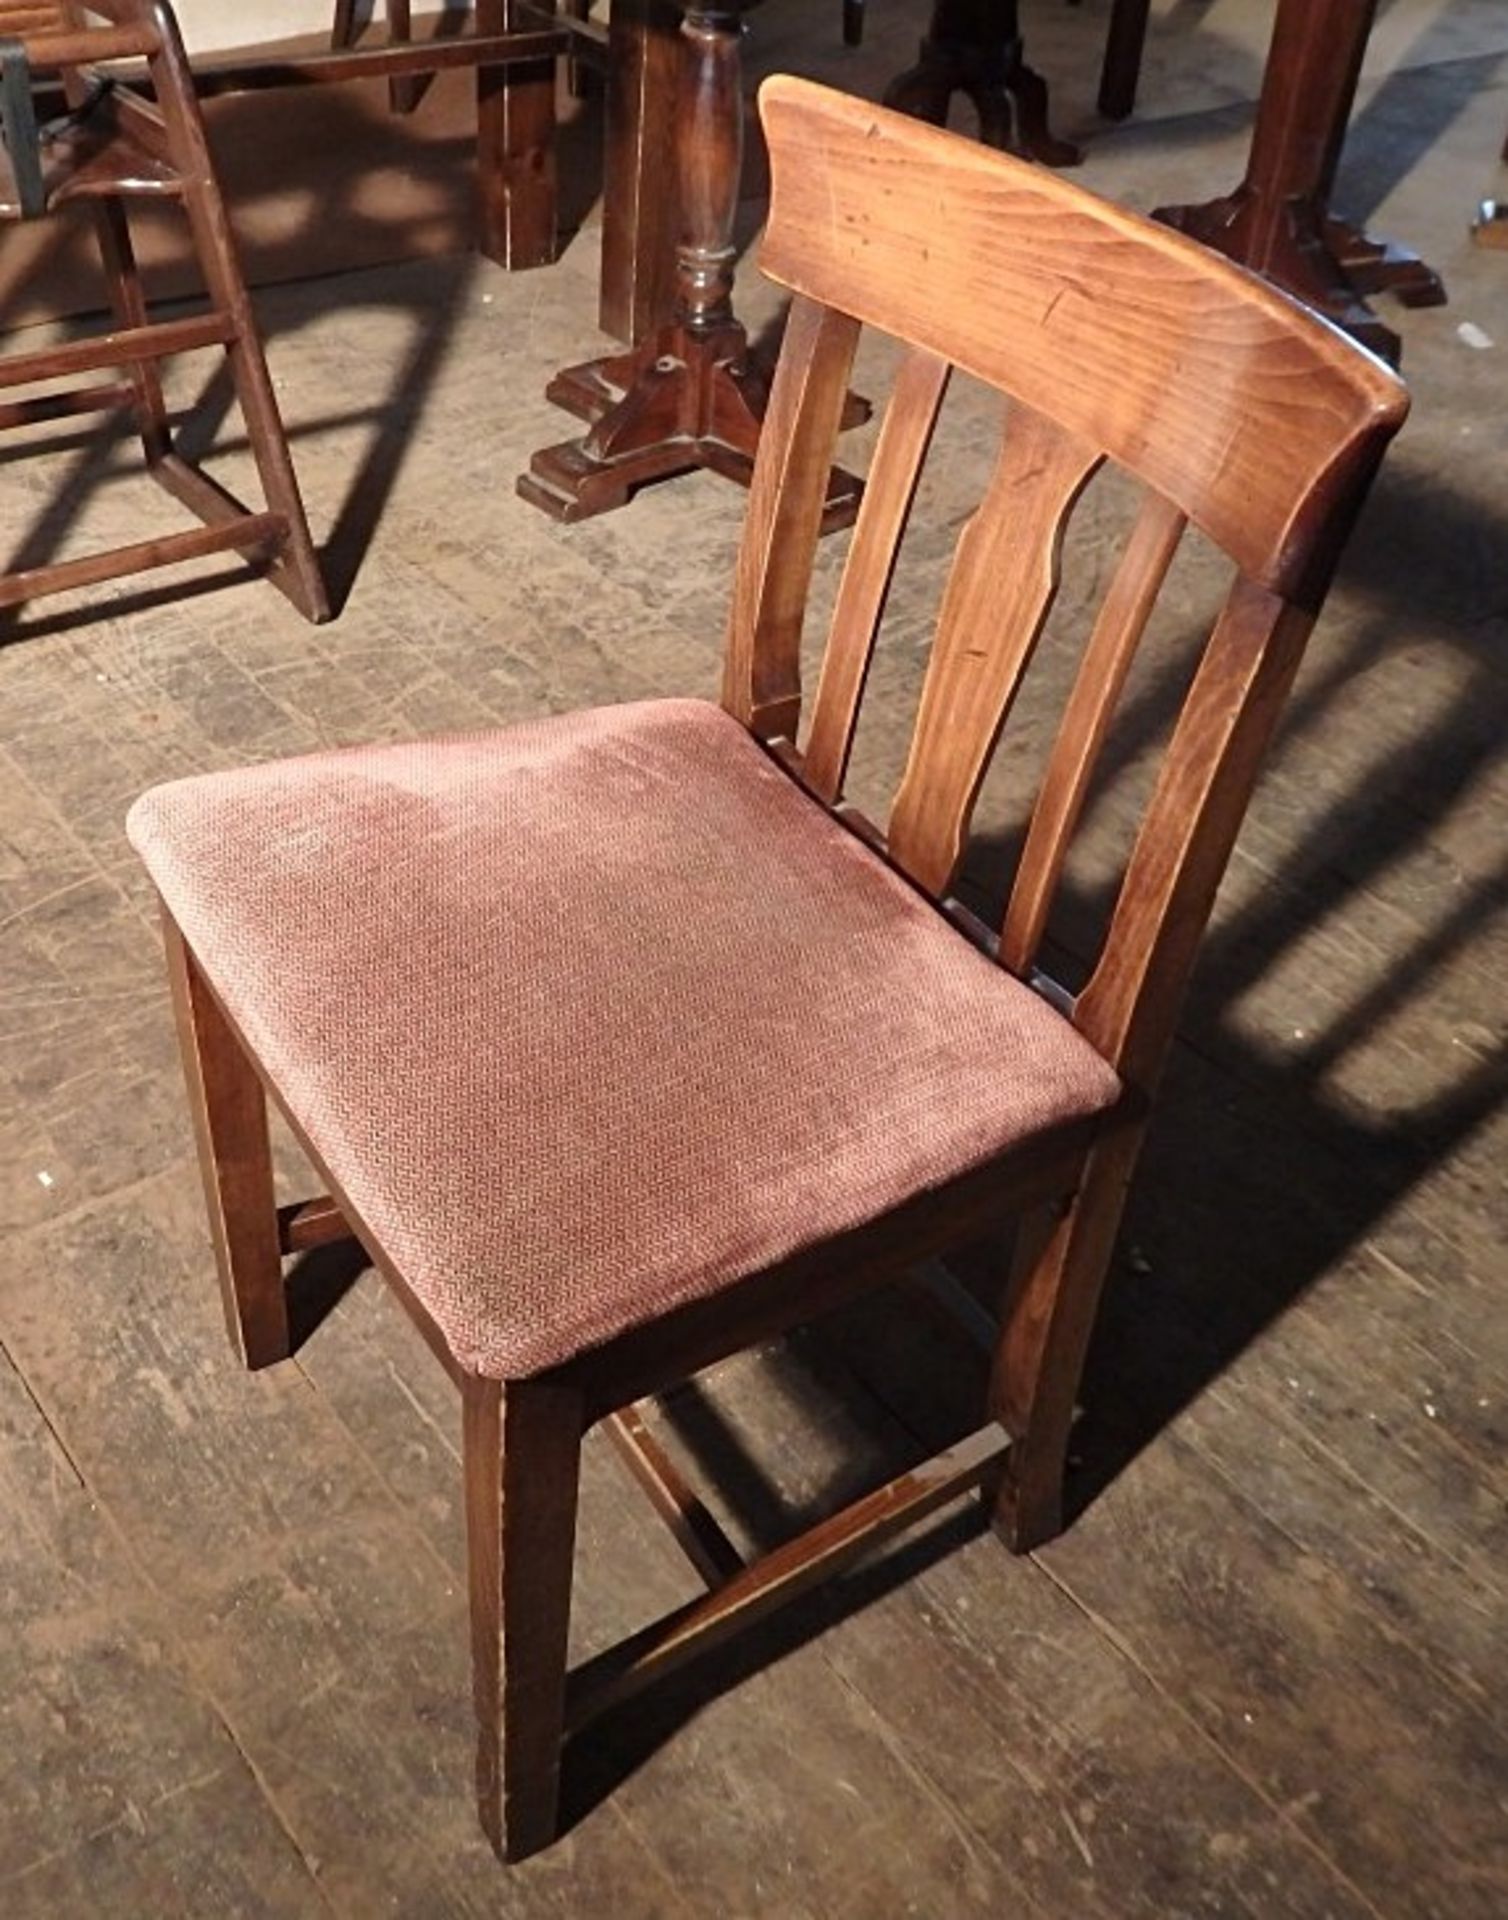 10 x Bistro Chairs - All Recently Taken From A Bar & Restaurant Environment - Ref: NDE080A - Type: M - Image 3 of 4